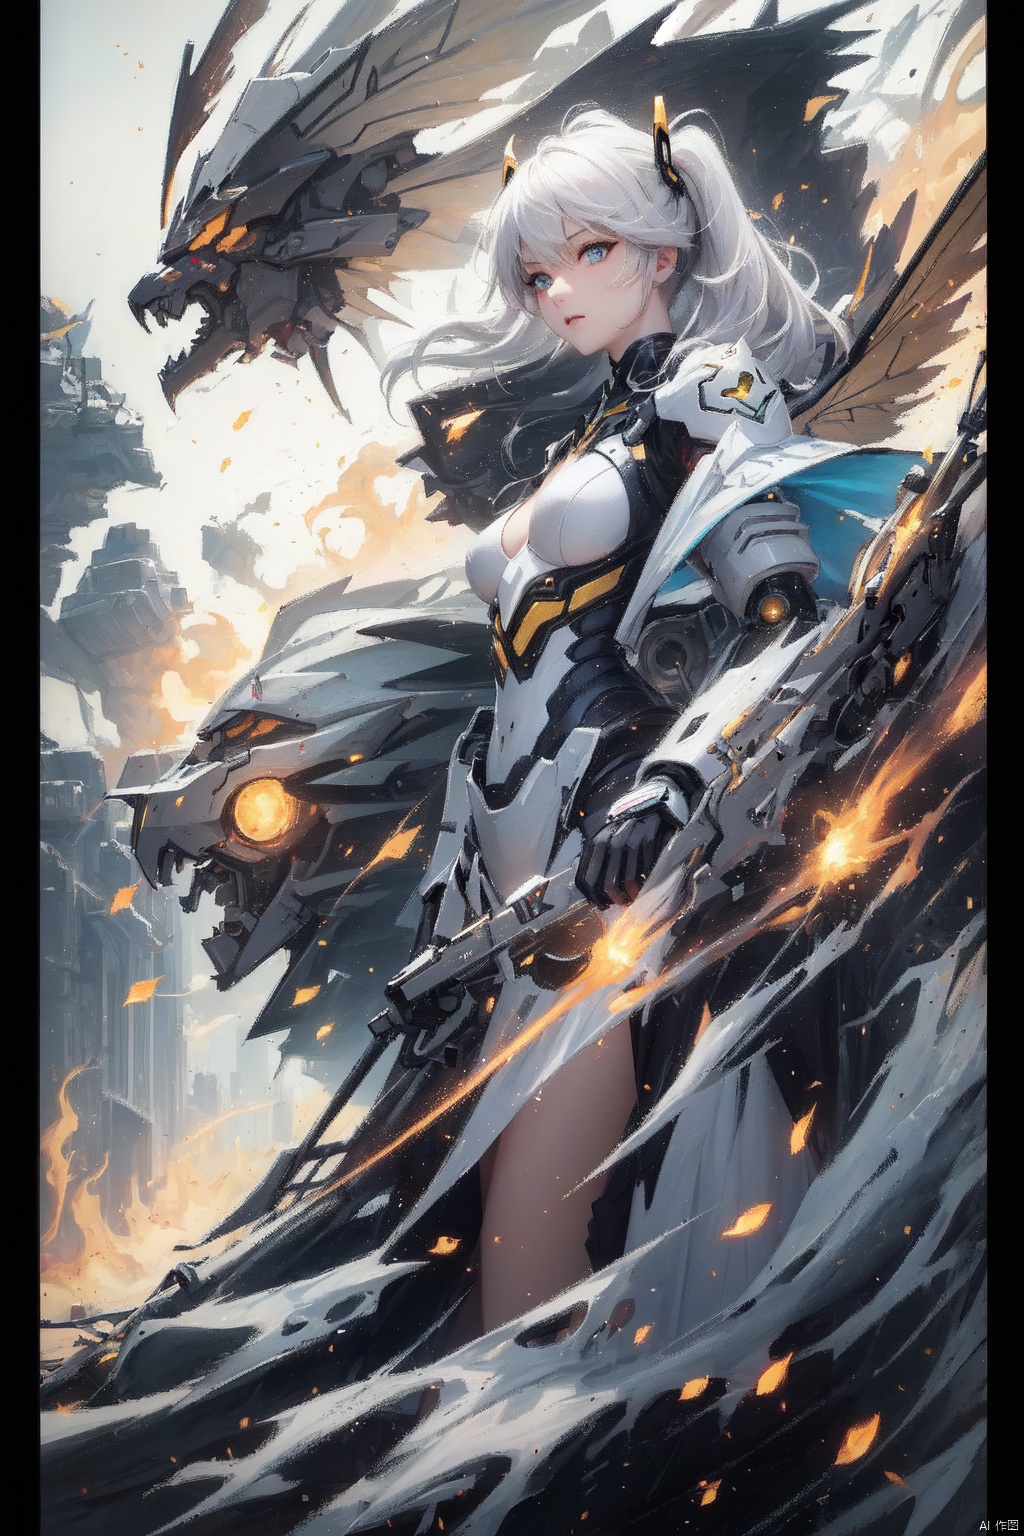  1girl,breasts,long hair,holding,weapon,holding weapon,standing,outdoors,floating hair,thigh strap,leotard,blue eyes,white hair,medium breasts,gloves,bangs,day,holding sword,full body,looking at viewer,closed mouth,headgear,armor,very long hair,solo,glowing,robot,[blush],building,white footwear,covered navel,mecha,hair between eyes,white gloves,hair ornament,black socks,sky,backlighting,white leotard,large breasts,cool,'((yellow and black exoskeleton))','((Augmented cyborg))','((Girl fused with a wasp))'((yellow hair color))',wasp wings,wasp tattoo,action scene,queen bee,supermodel,(petalsfall）[[mechagirl]],mecha,up,mecha,,future,solo,looking at viewer,yellow eyes,weapon,white hair,wings,armor,mecha musume,v-fin,long hair,breasts,mecha angel,solo,looking at viewer,blue eyes,yellow eyes,weapon,white hair,wings,[[armor]],[mecha musume],v-fin,long ponytail hair,breasts,big ponytail,petite,whole body,beautiful detailed fullbody,standing,Maro eyebrows,((white skin)),white hair,gray hair,(underboob of whitejacket),shoulder holster,leg holster,pencil skirt,[[mechagirl girl]],shortstacks,huge breasts,cat ear,mecha wings,pretty face,charming eyes,perfect shape,complex design,exquisite picture,[full body mech],white mecha shoes,[outer bone panzer],Photos of vast landscapes,(from below you can see the sky and the fields),a girl standing in a flower bed looking up at the sky,(Full moon :1.2),(meteor :0.9),(nebula :1.3),BREAK making art,mountains in the distance,trees,(warm light source :1.2),(fireflies :1.2),lights,purple and orange,intricate details,Write,BREAK (Masterpiece :1.2),(highest quality),4k,Super Detail,(Dynamic configuration :1.4),very detailed and colorful details (Rainbow colors :1.2),(Shining lights, atmospheric lights),Fantastic,Magical,(Solo :1.2),Robot close-up with wings flying through the air,Mechanical Wings,Stay from Overwatch,Farah,from Overwatch,Echoes from Overwatch,Overwatch Reinhart,Overwatch design,Mechanical Angel,armor Angle with wings,Overwatch skin,Future robot Angel,8k HD wallpaper JPEG8k HD wallpaper, machinery,Cyberpunk